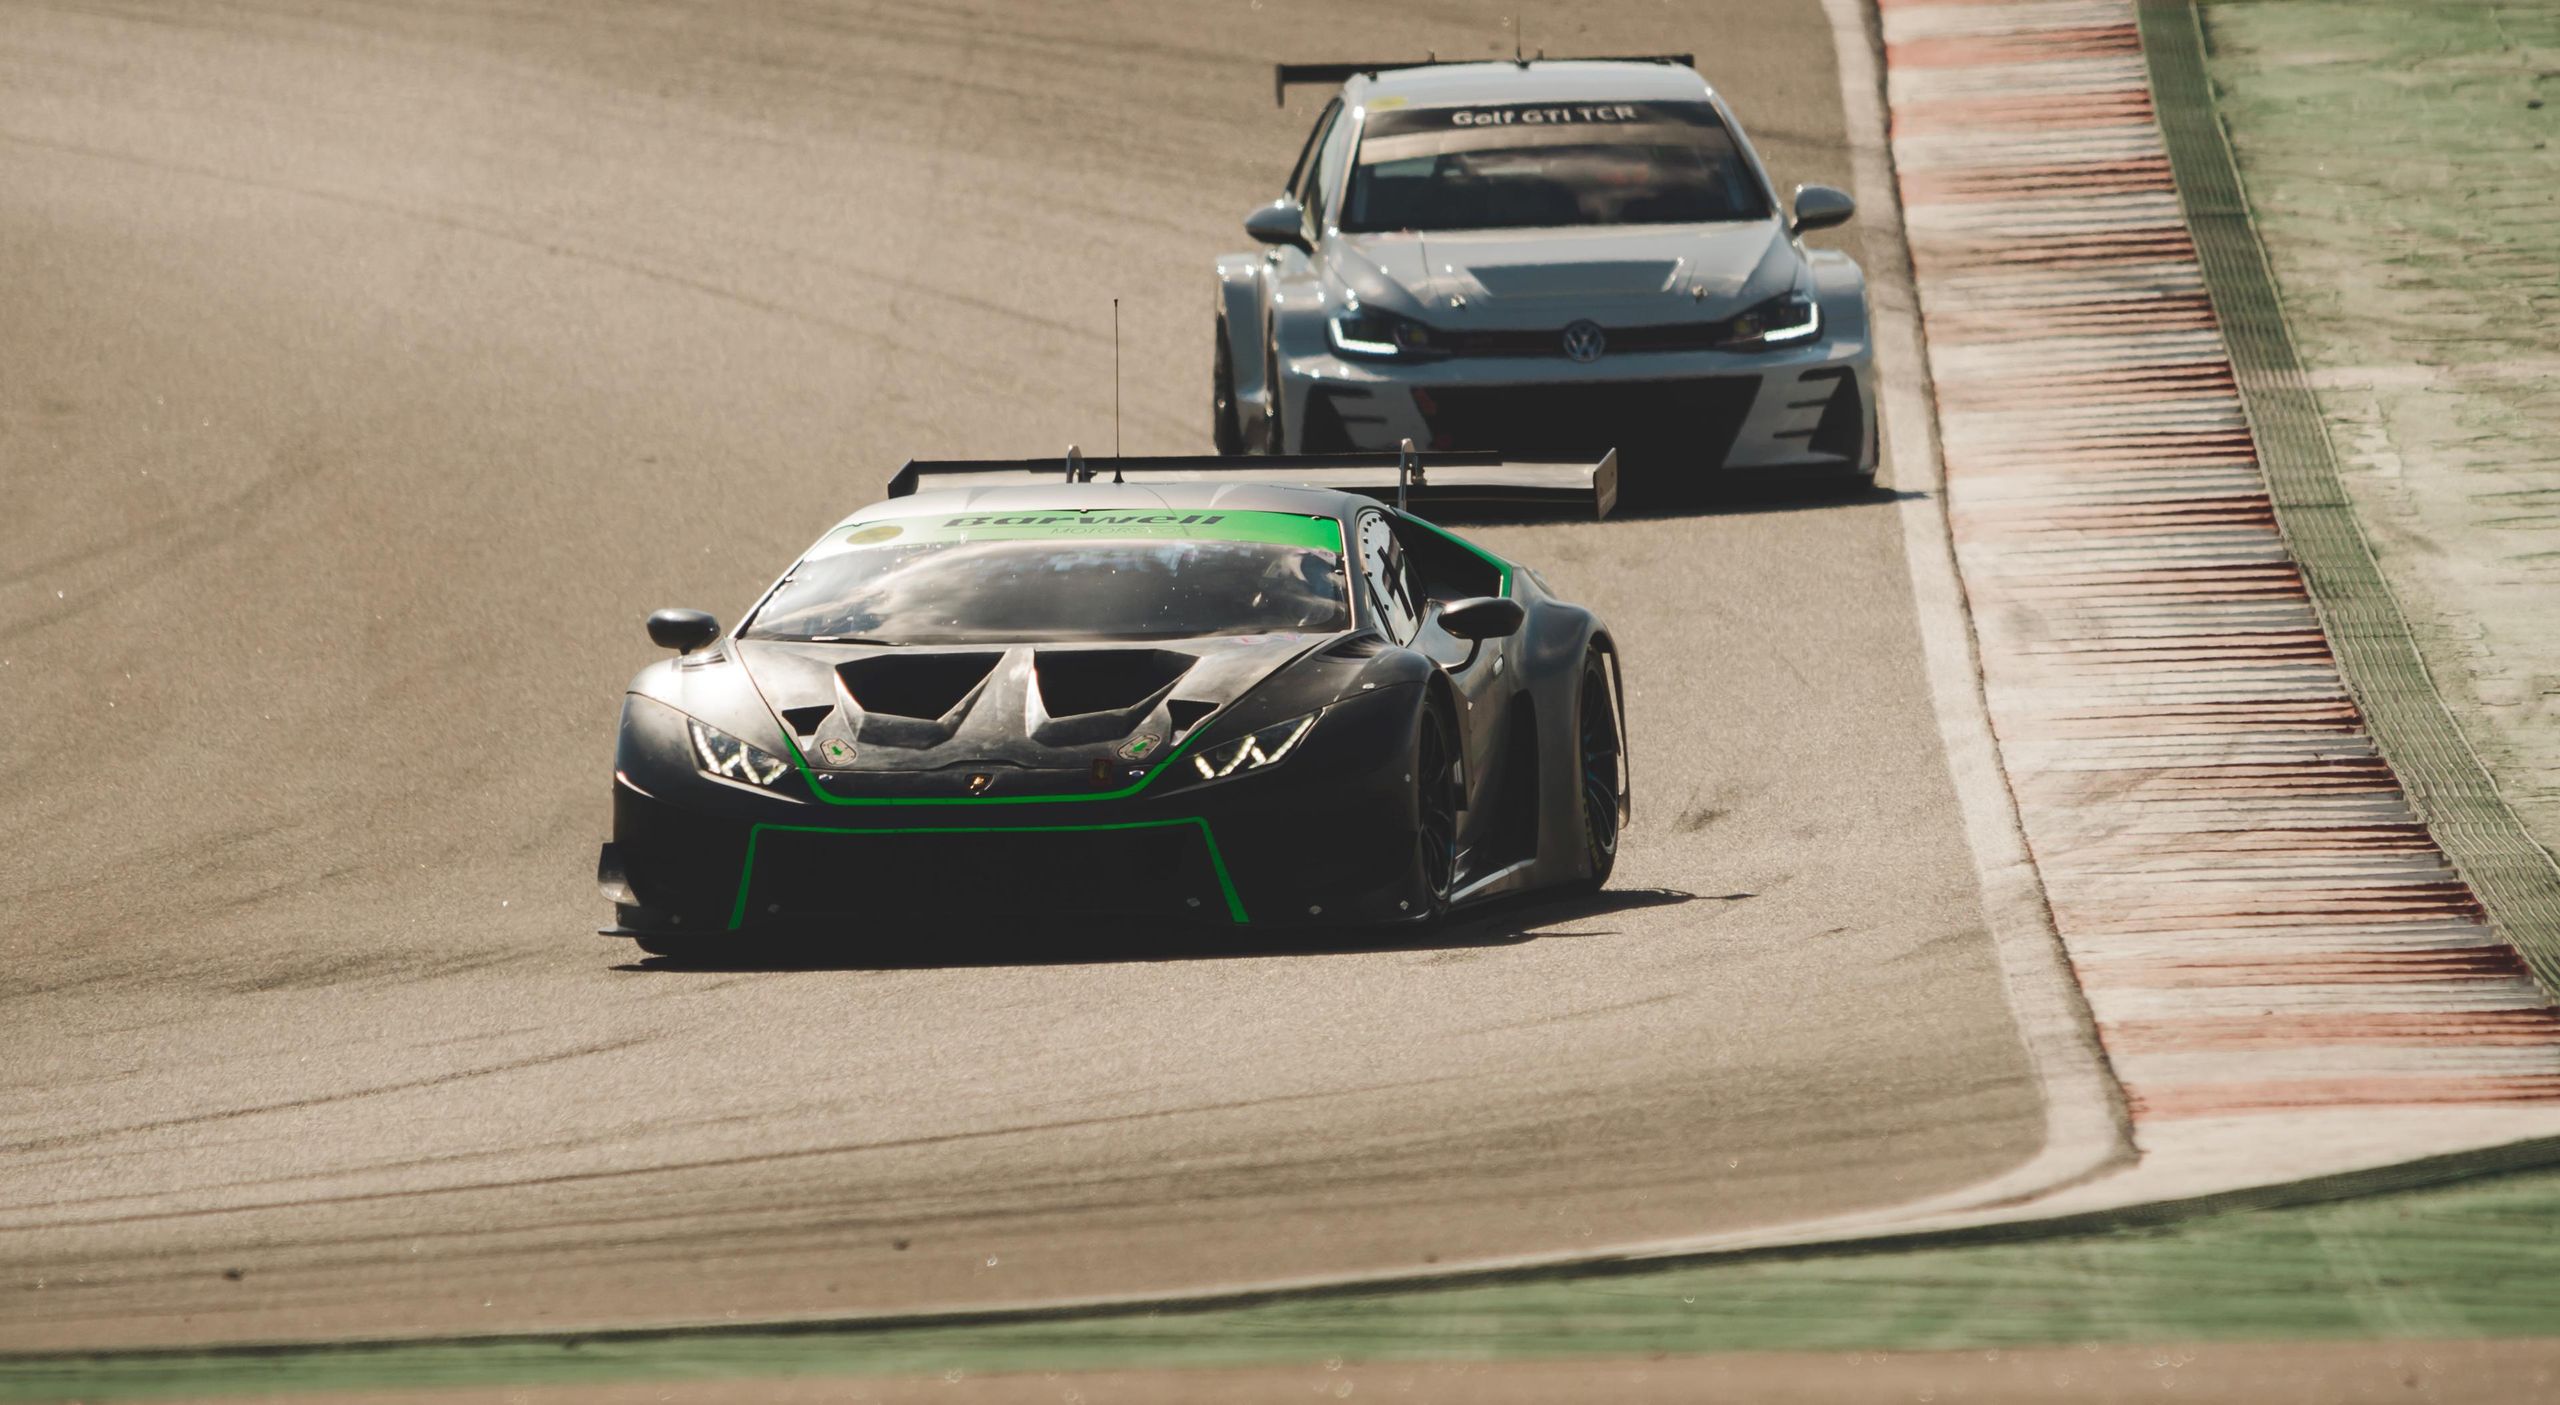 Image from Portimao Racetrack